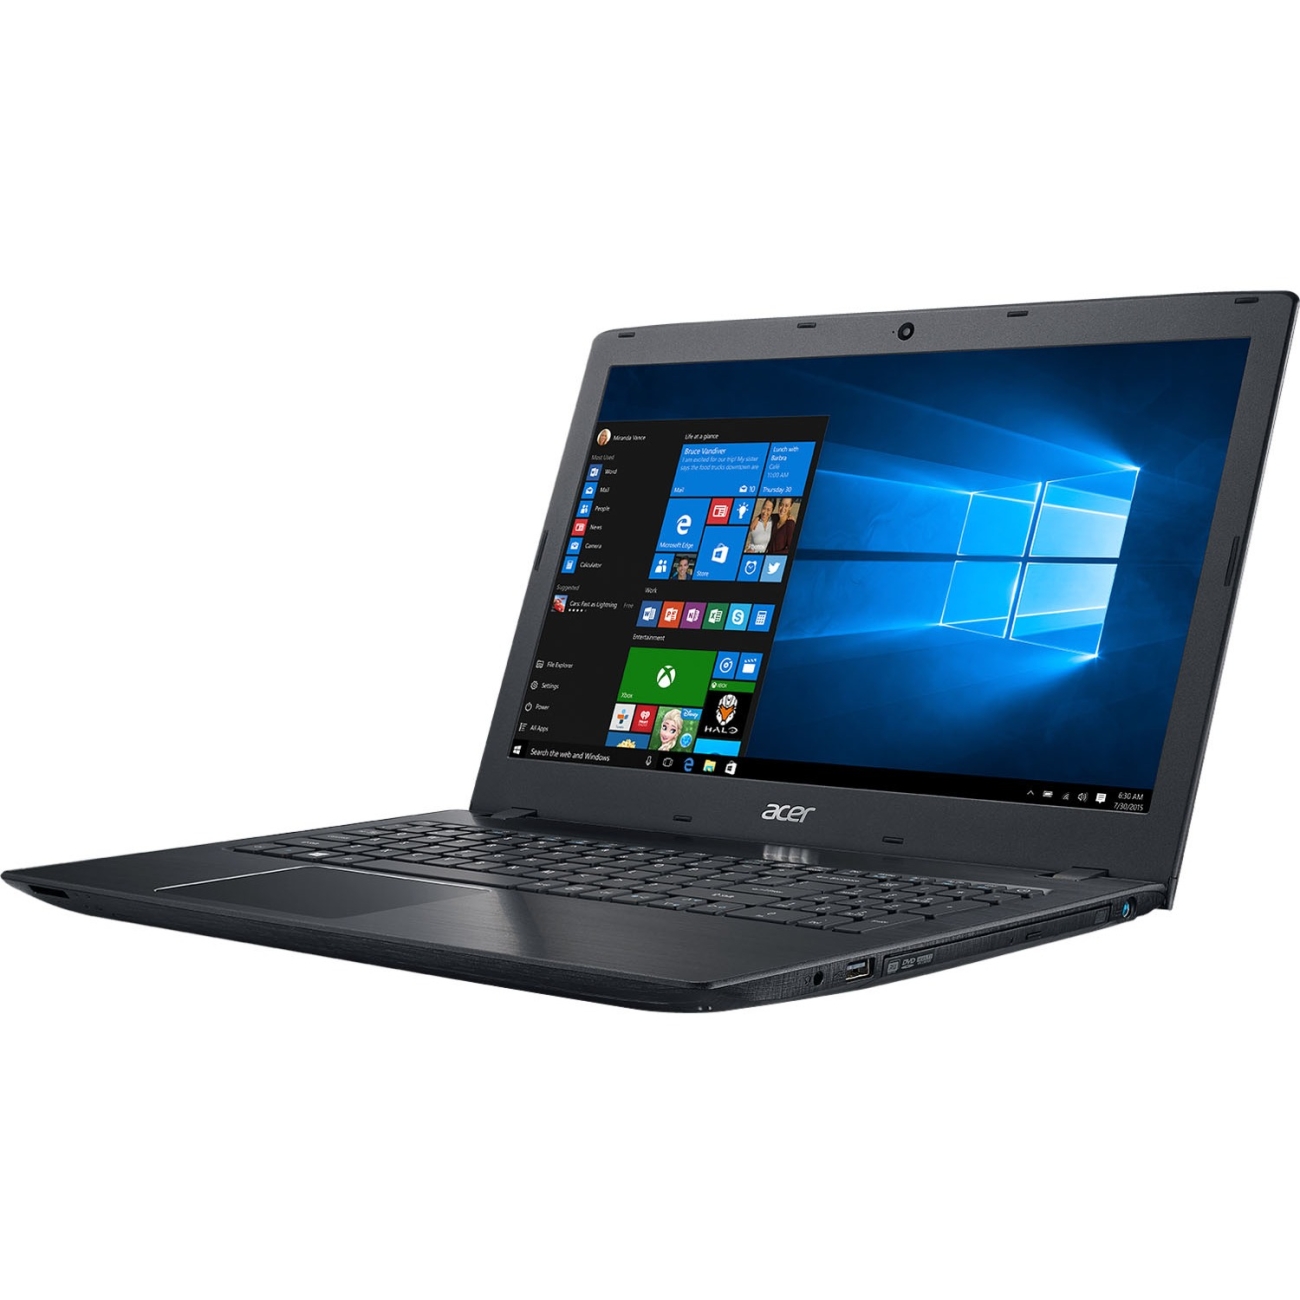 Acer Aspire E 15 E5-575G-53VG - 15.6" - Core i5 6200U - 8 GB RAM - 256 GB SSD - US International - image 3 of 6